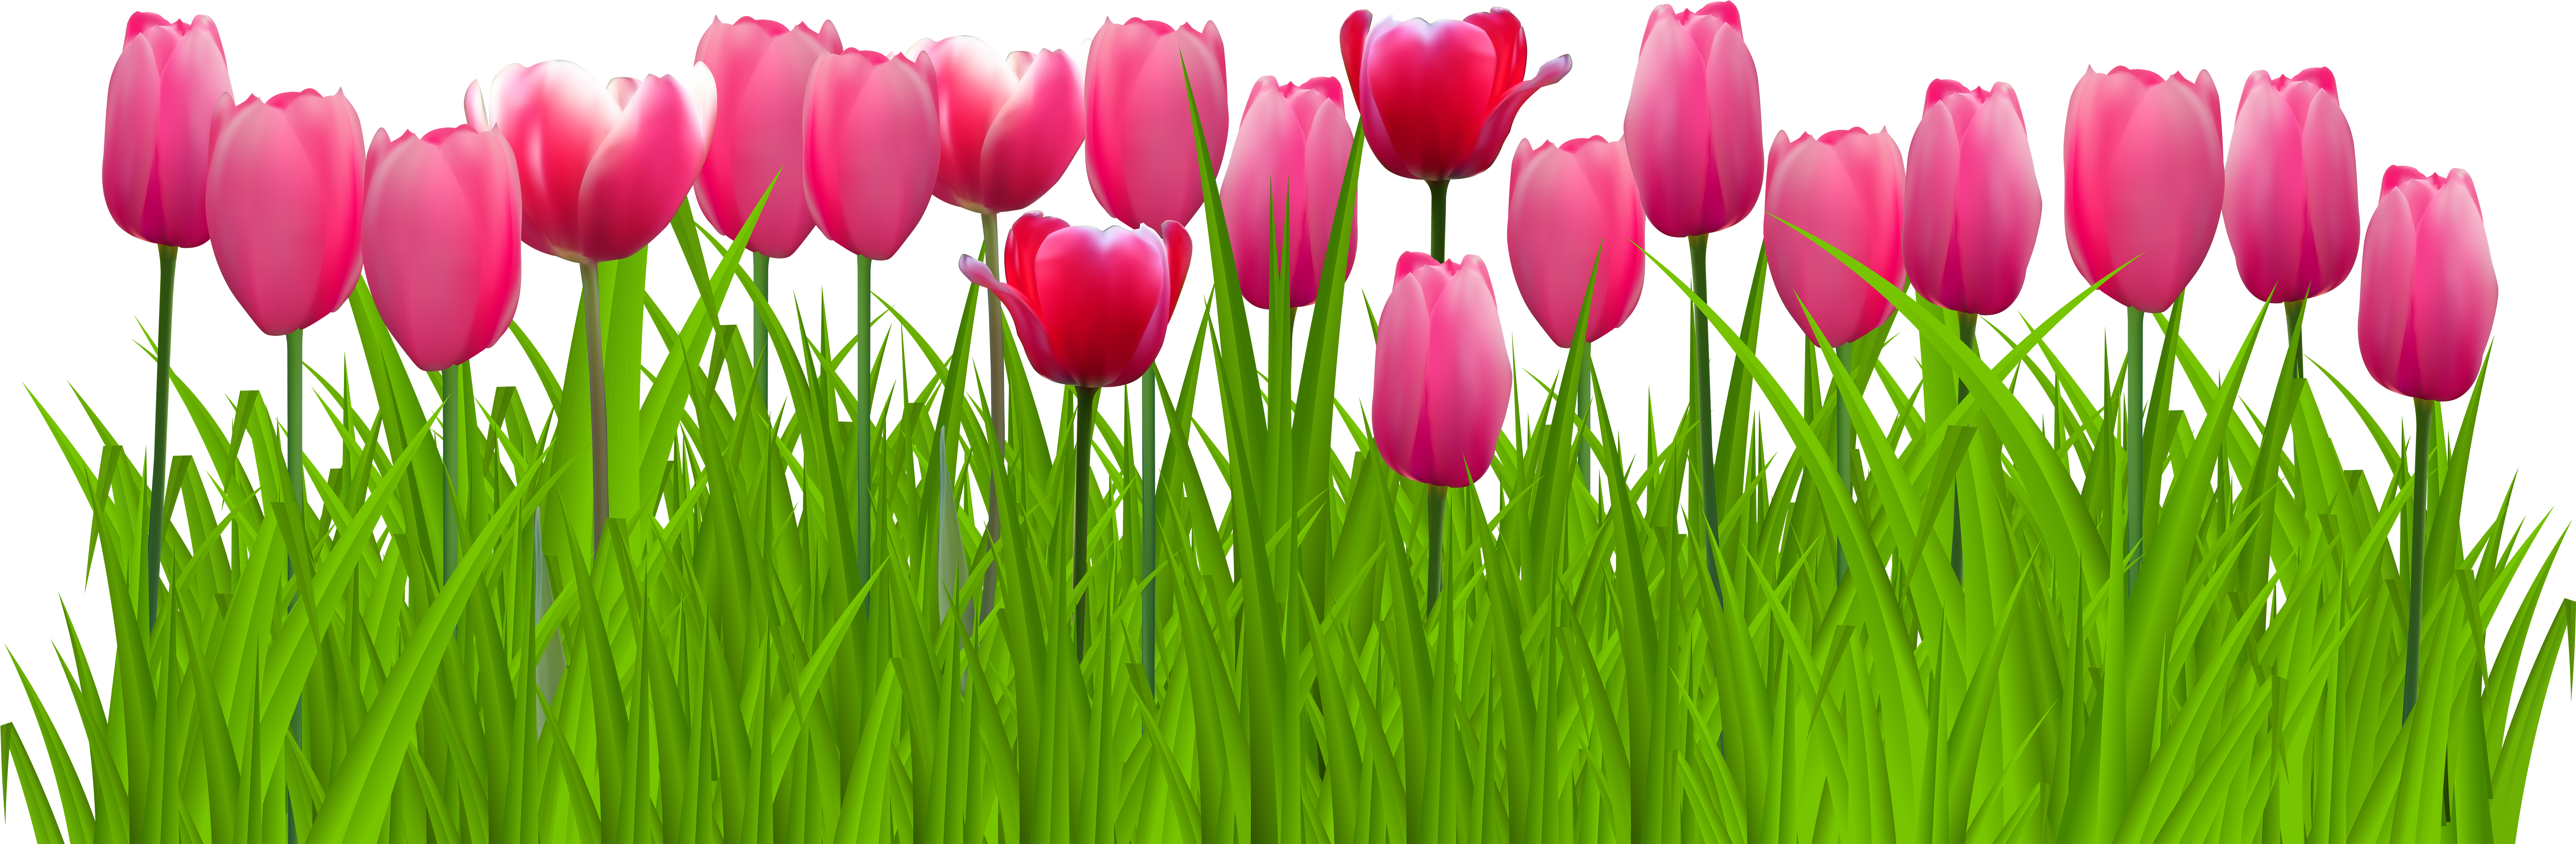 Grass With Pink Tulips Png Clip Art Image - Tulips Png (8000x2734)